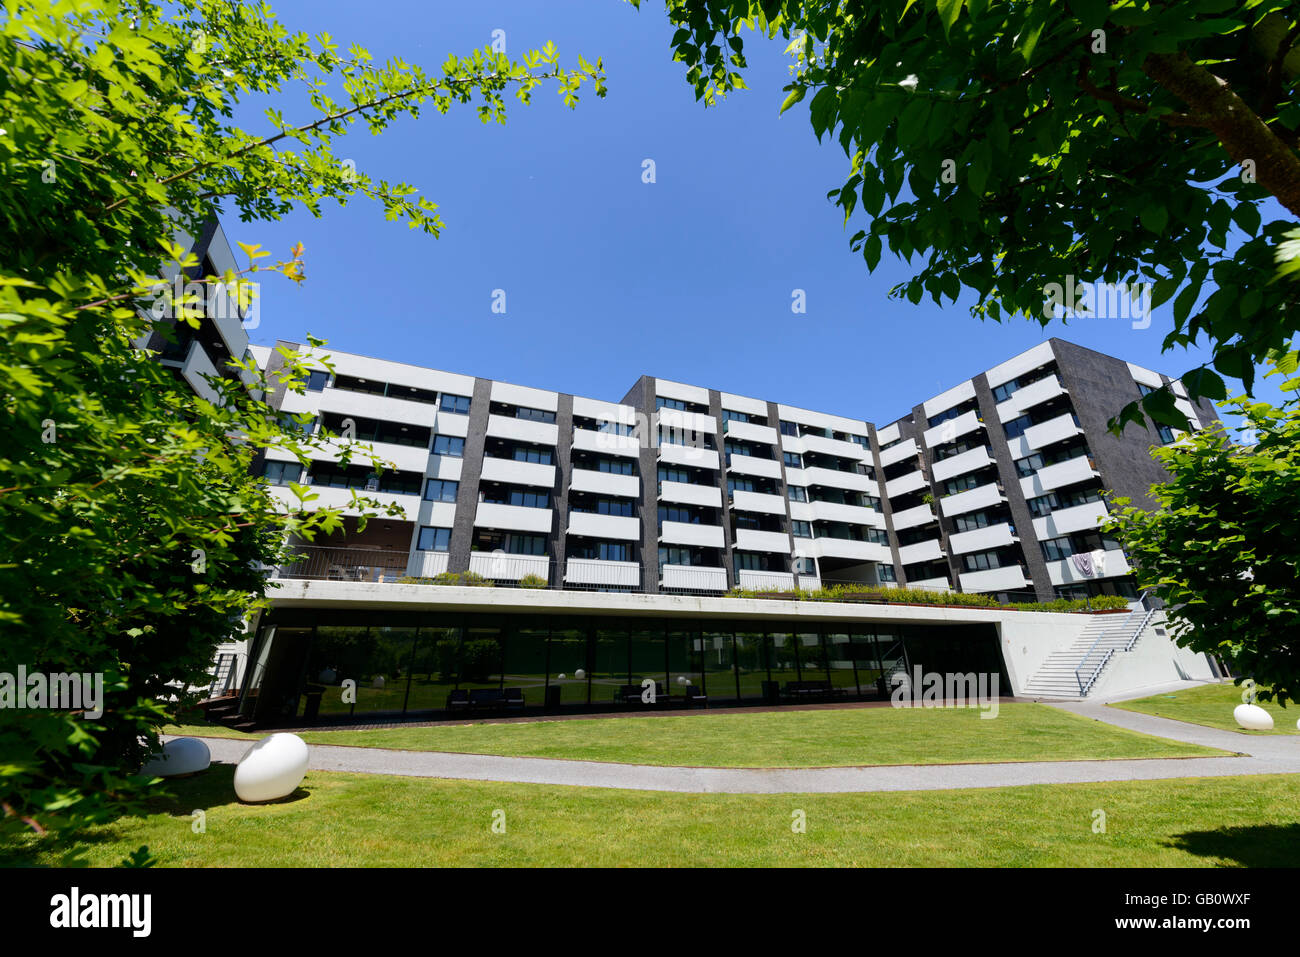 Garden inside a modern architecture residential apartment building gated community Stock Photo